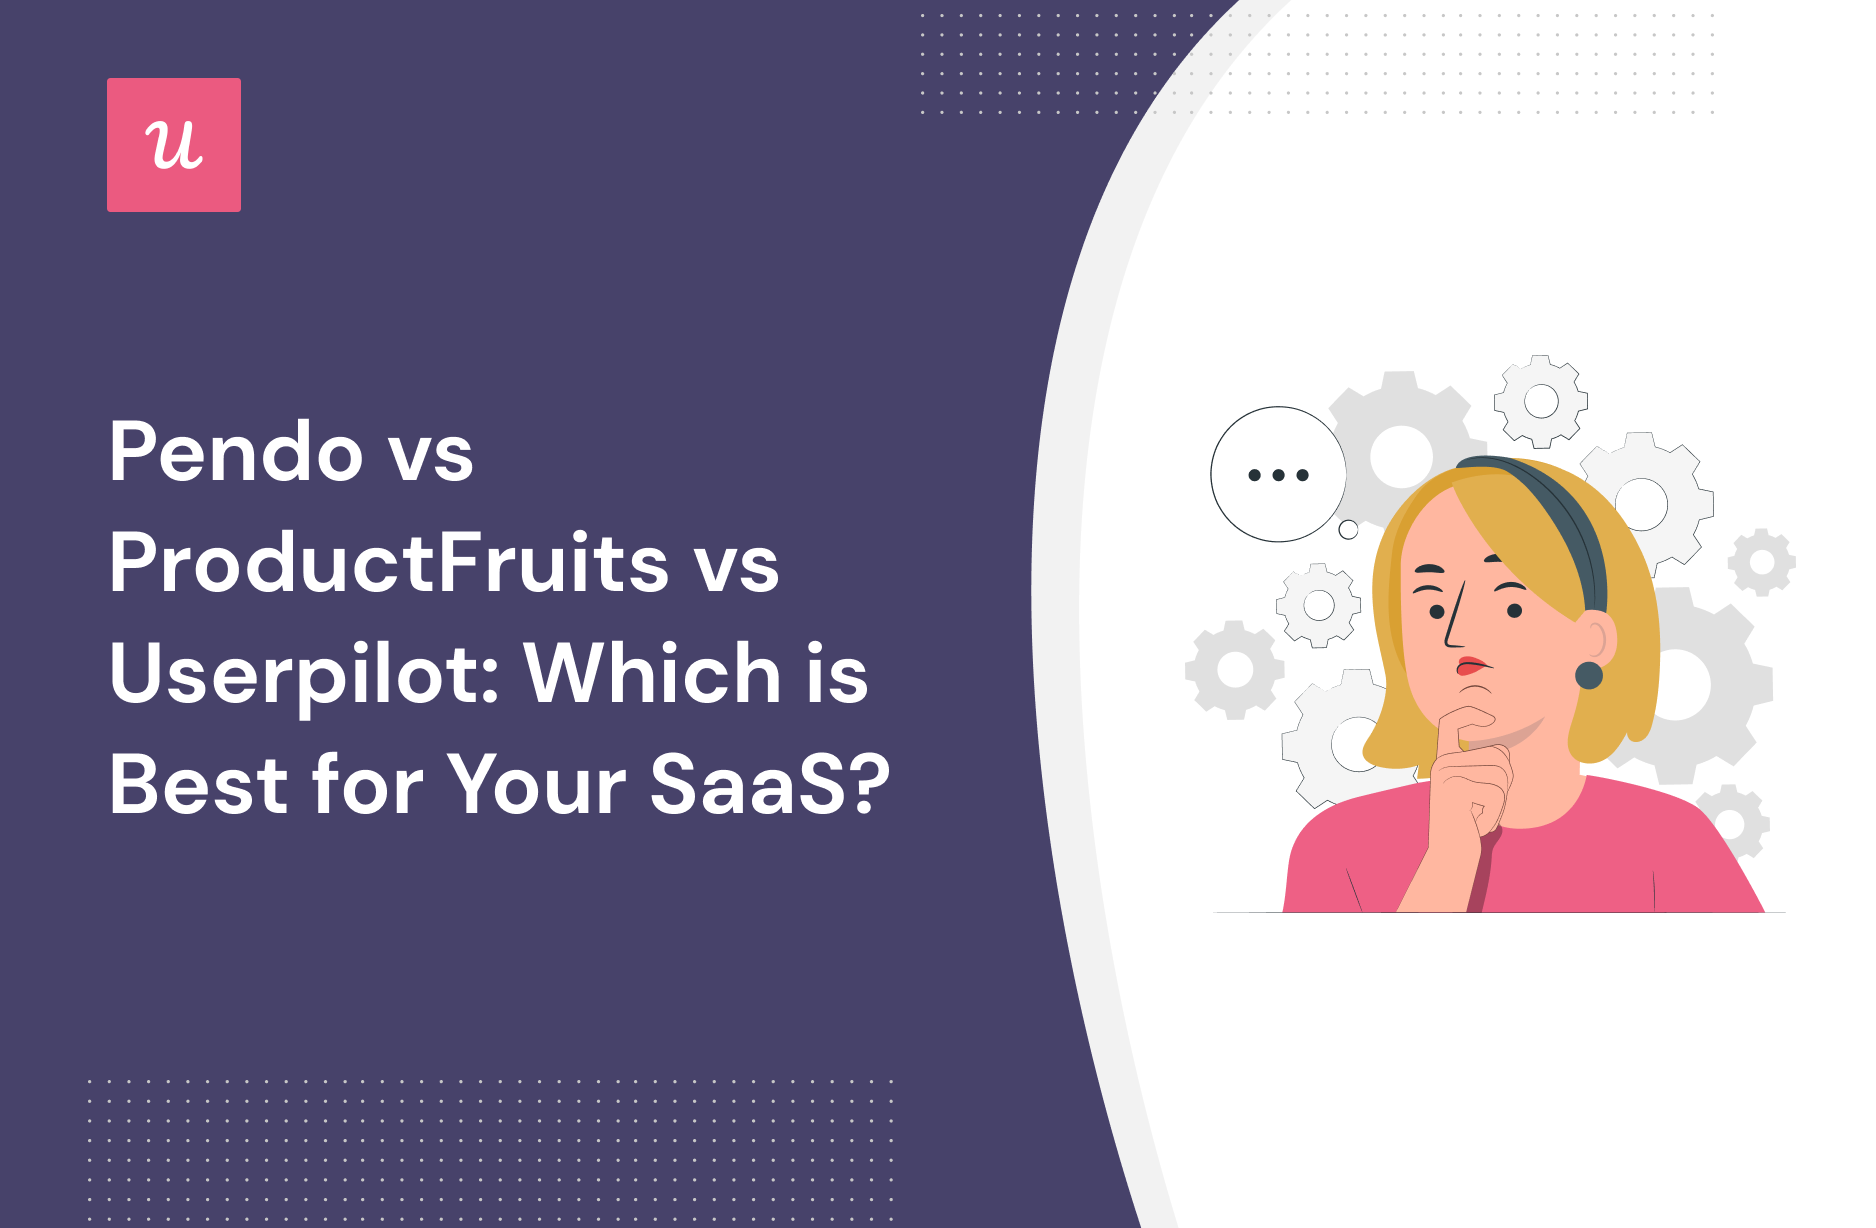 Pendo vs ProductFruits vs Userpilot: Which is Best for Your SaaS?